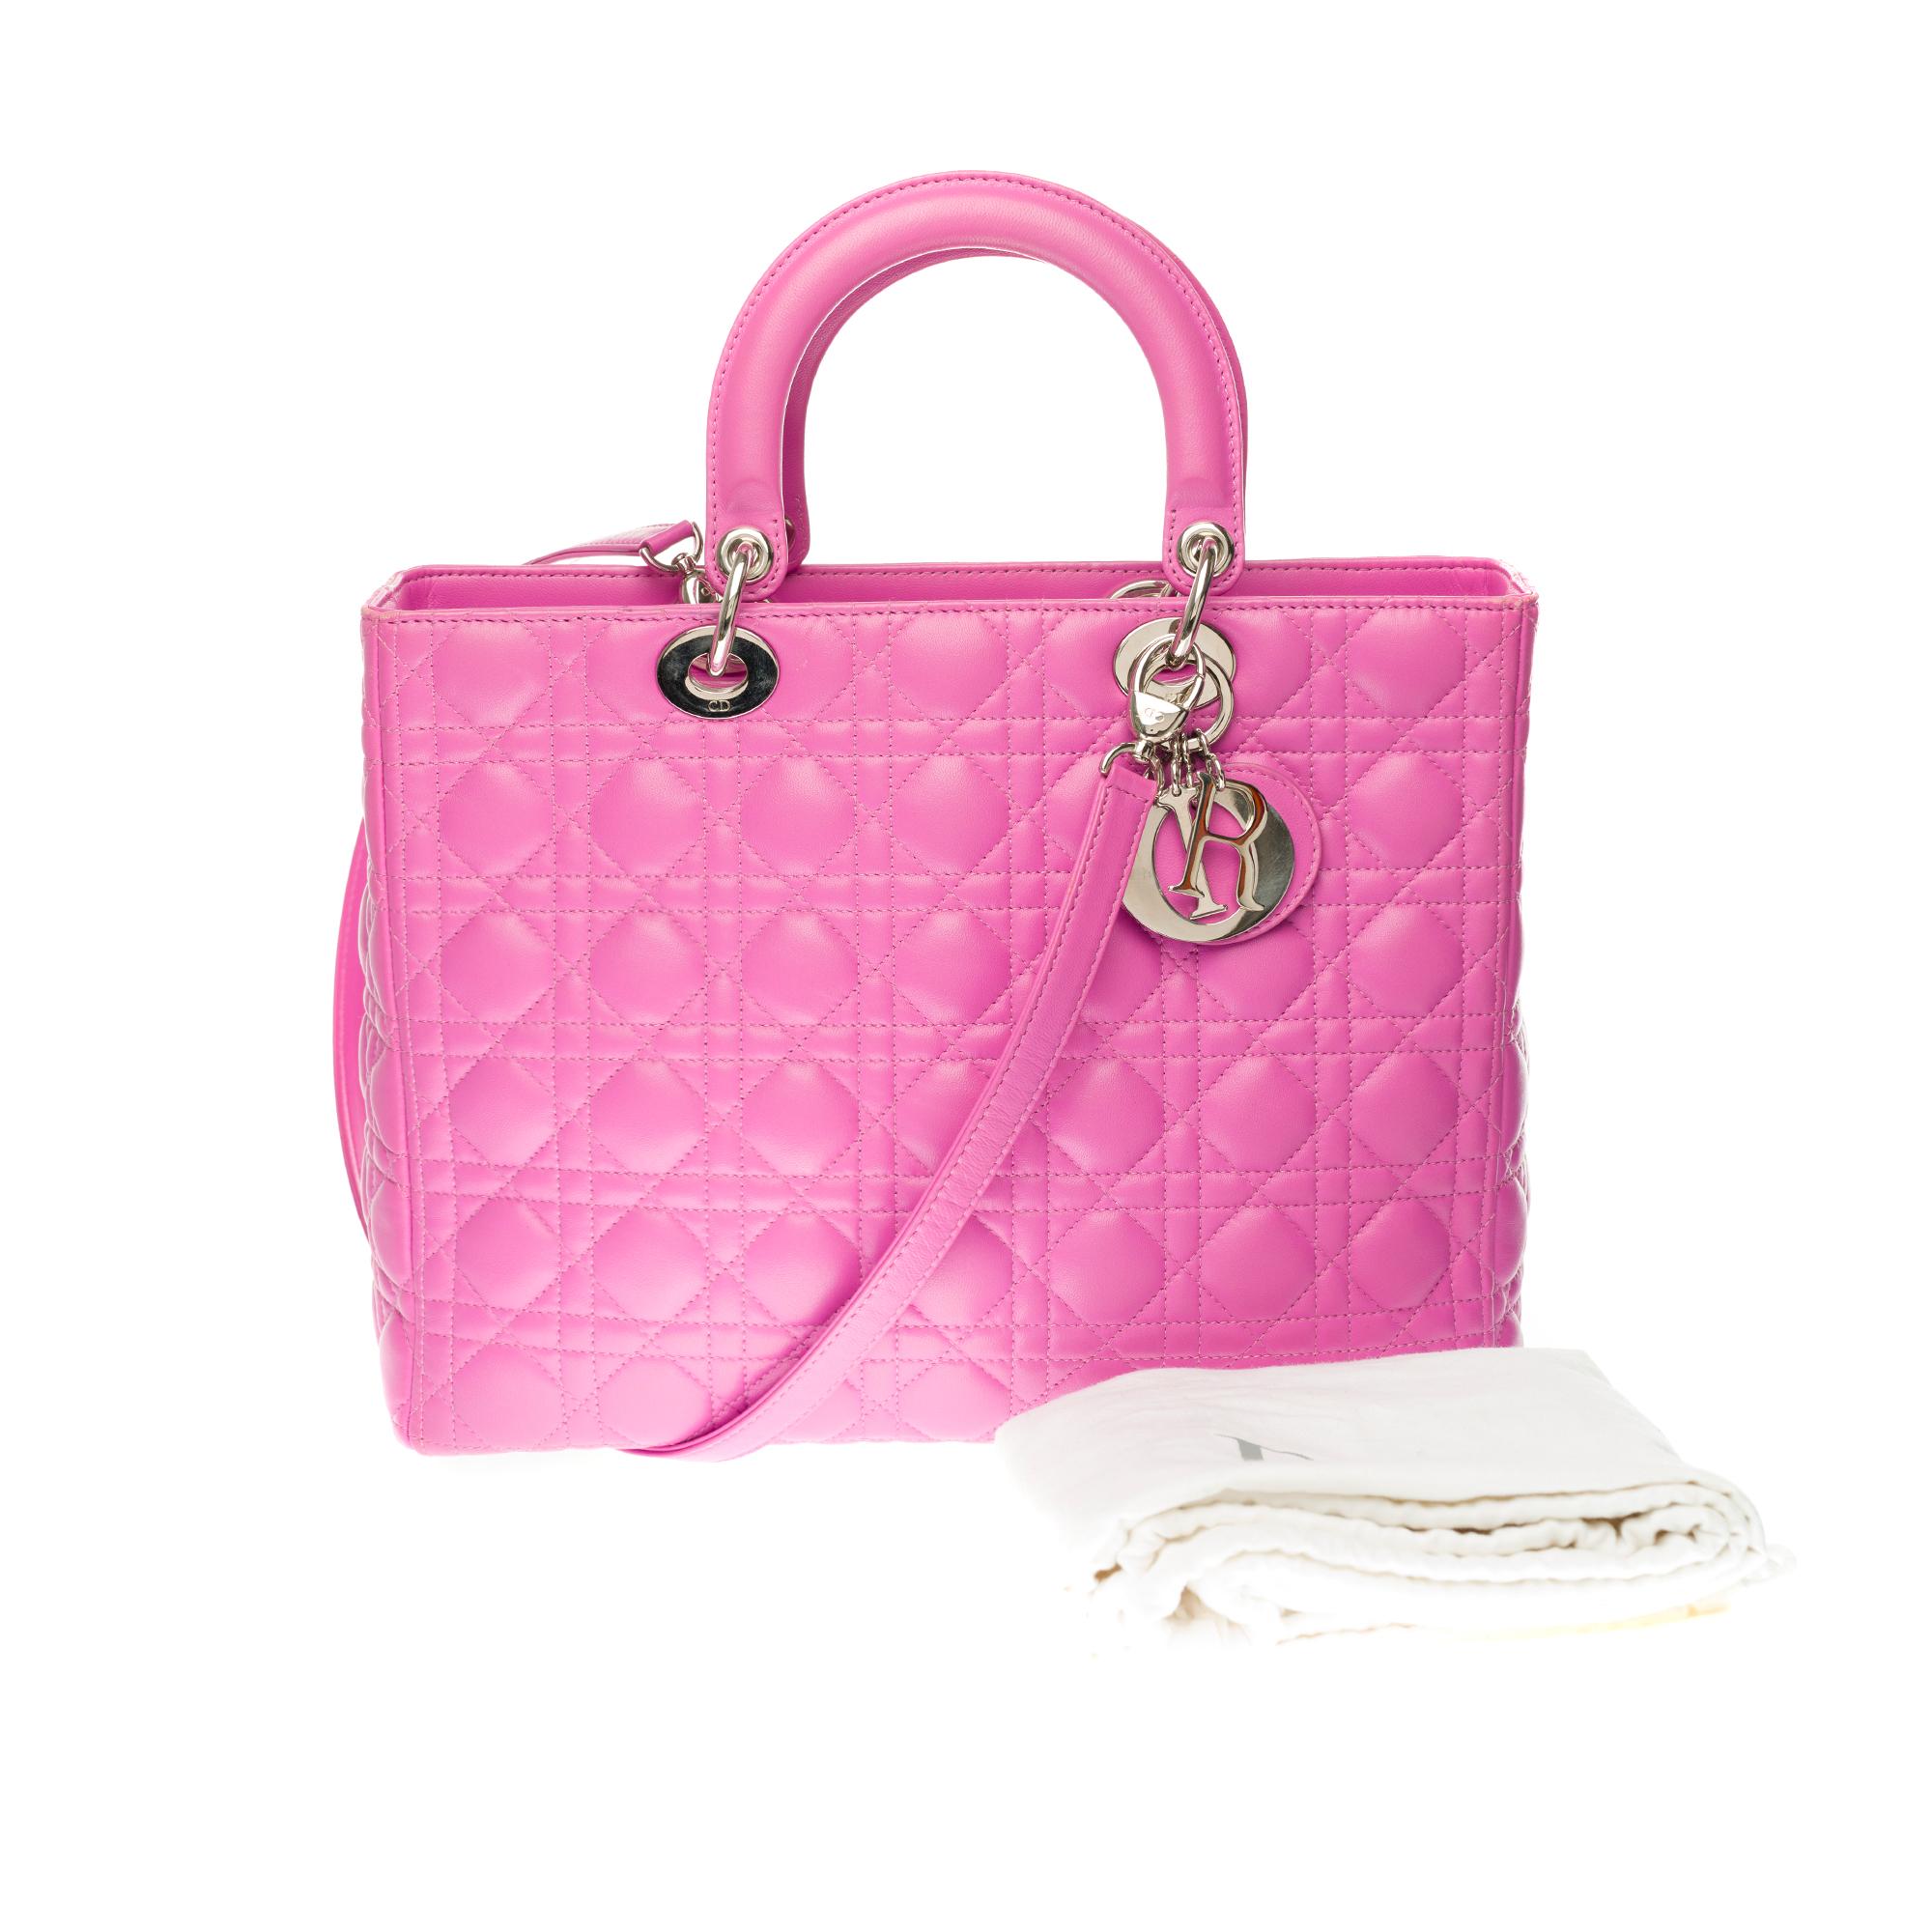 Lady Dior GM ( large model) shoulder bag with strap in pink cannage leather, SHW 3